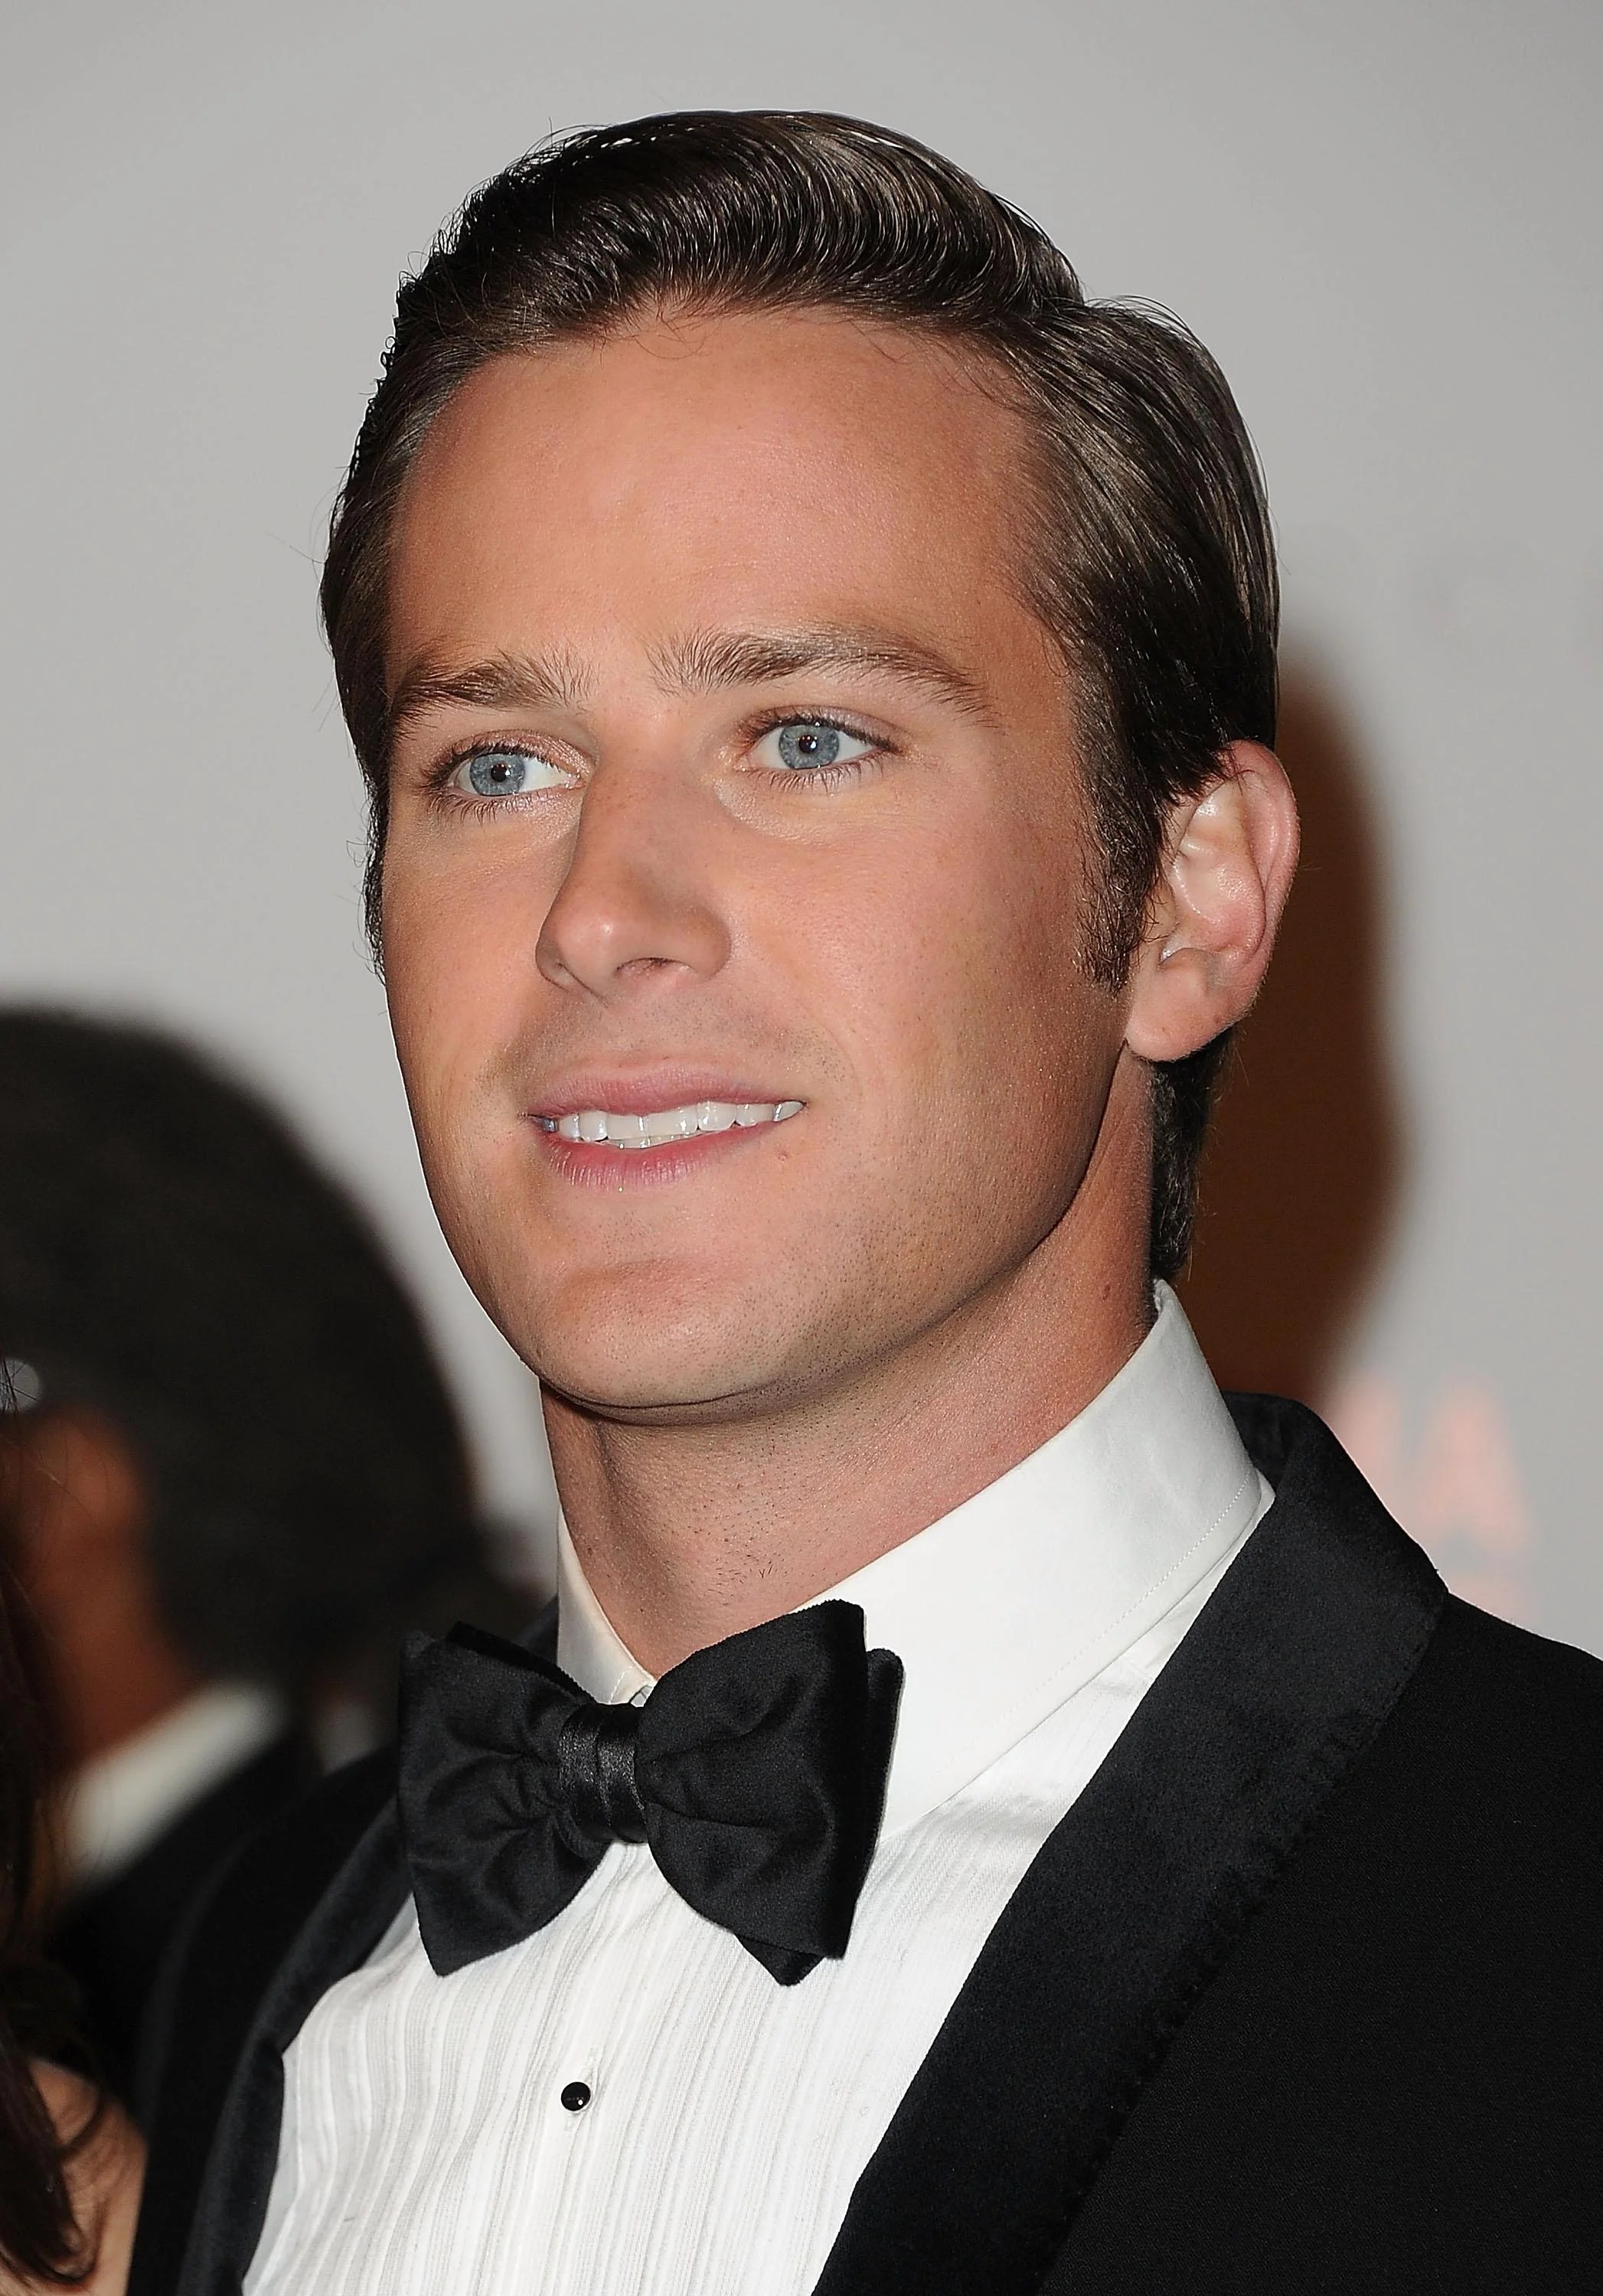 Armie Hammer The Origin of His Name